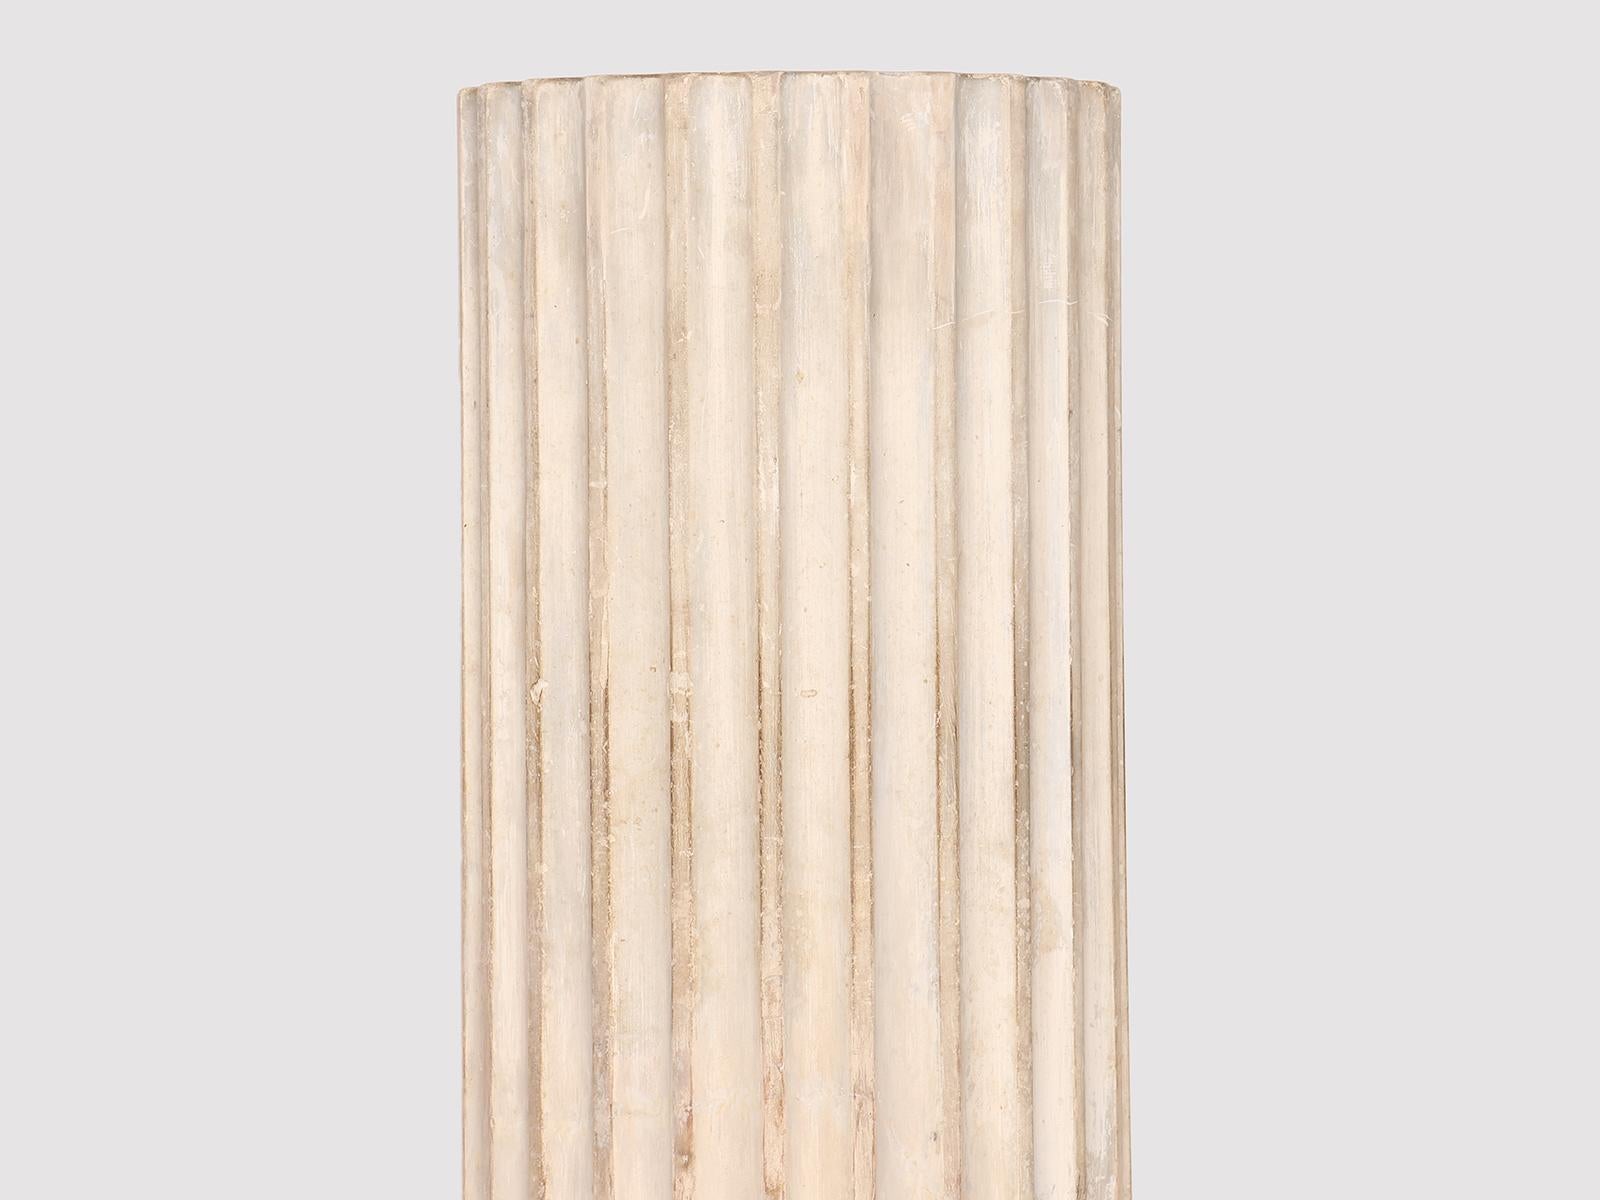 A model of a small column made of scagliola plaster, toric base and vertical grooves. Cast for the teaching drawing in the academy. Original patina. France second half of the 19th century.

